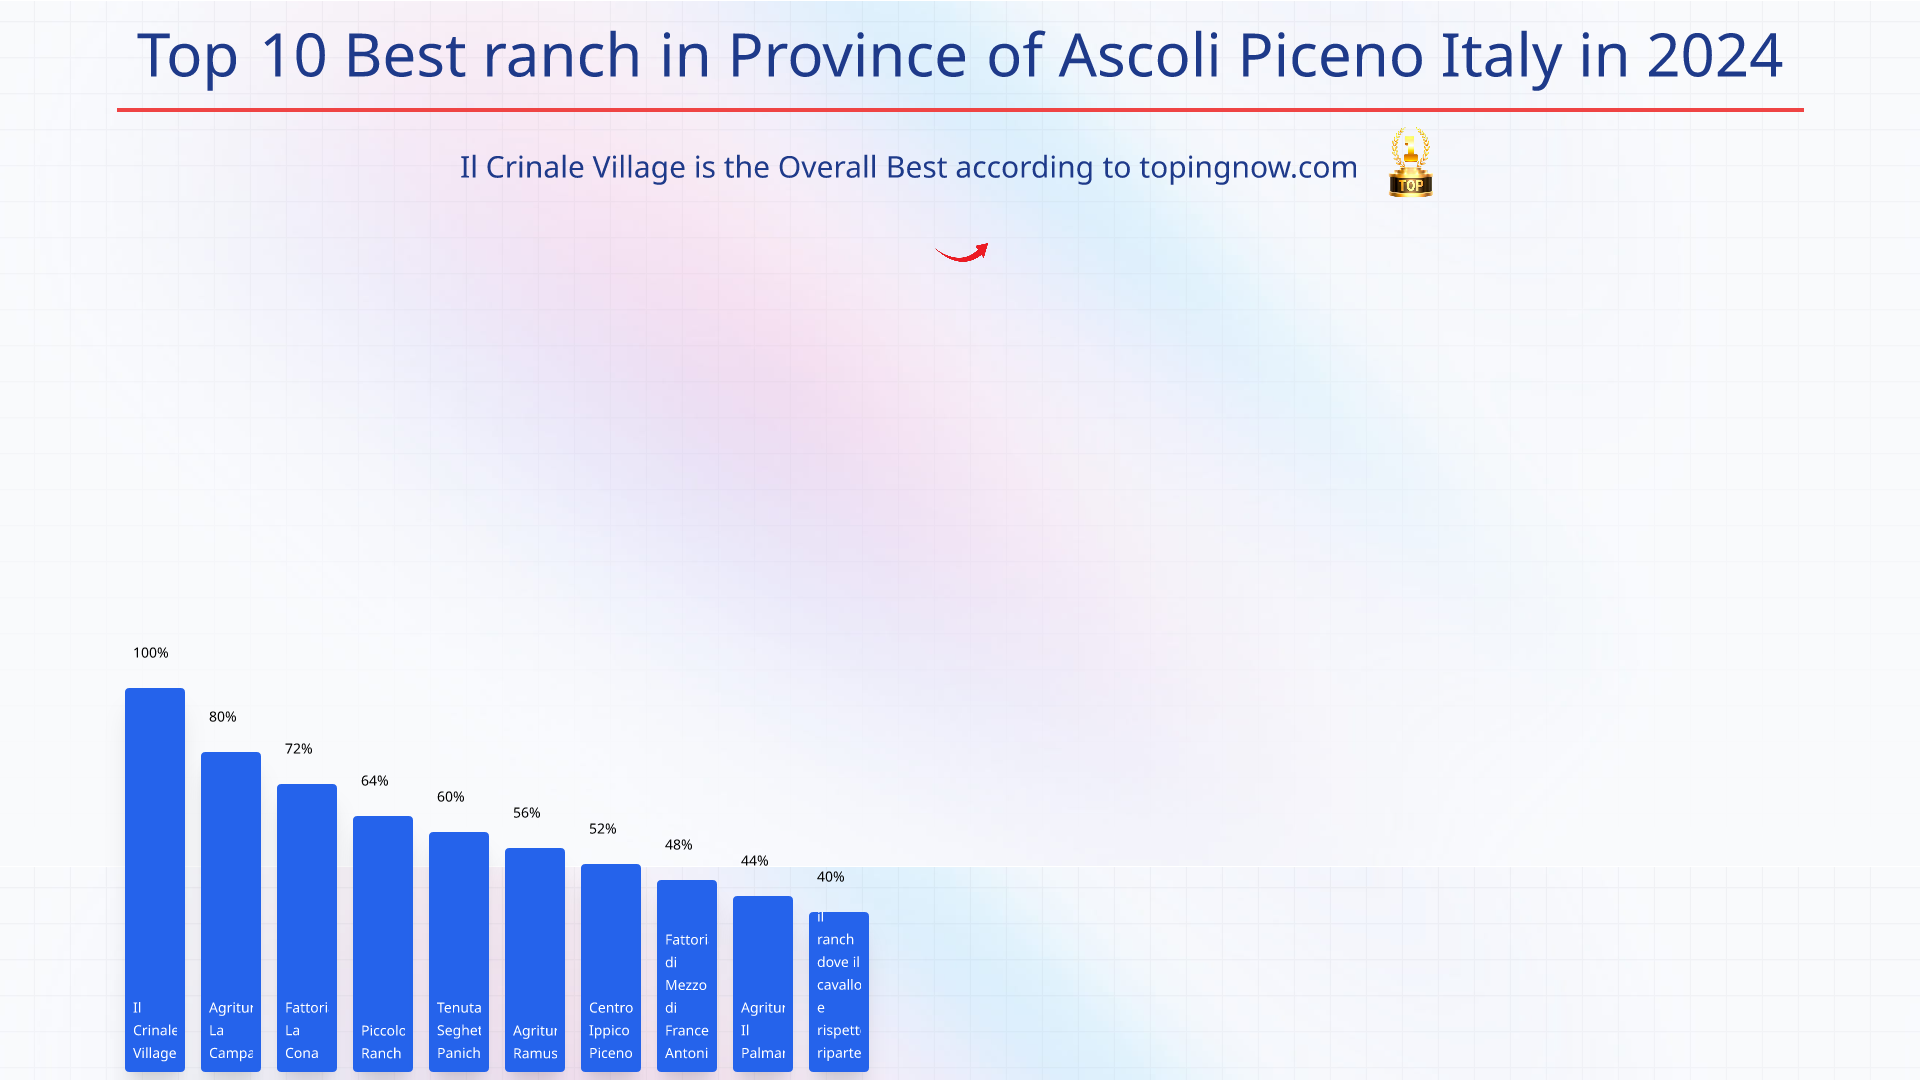 Top 10 Best ranch in Province of Ascoli Piceno Italy in 2024: Top 10 Best ranch in Province of Ascoli Piceno Italy in 2024